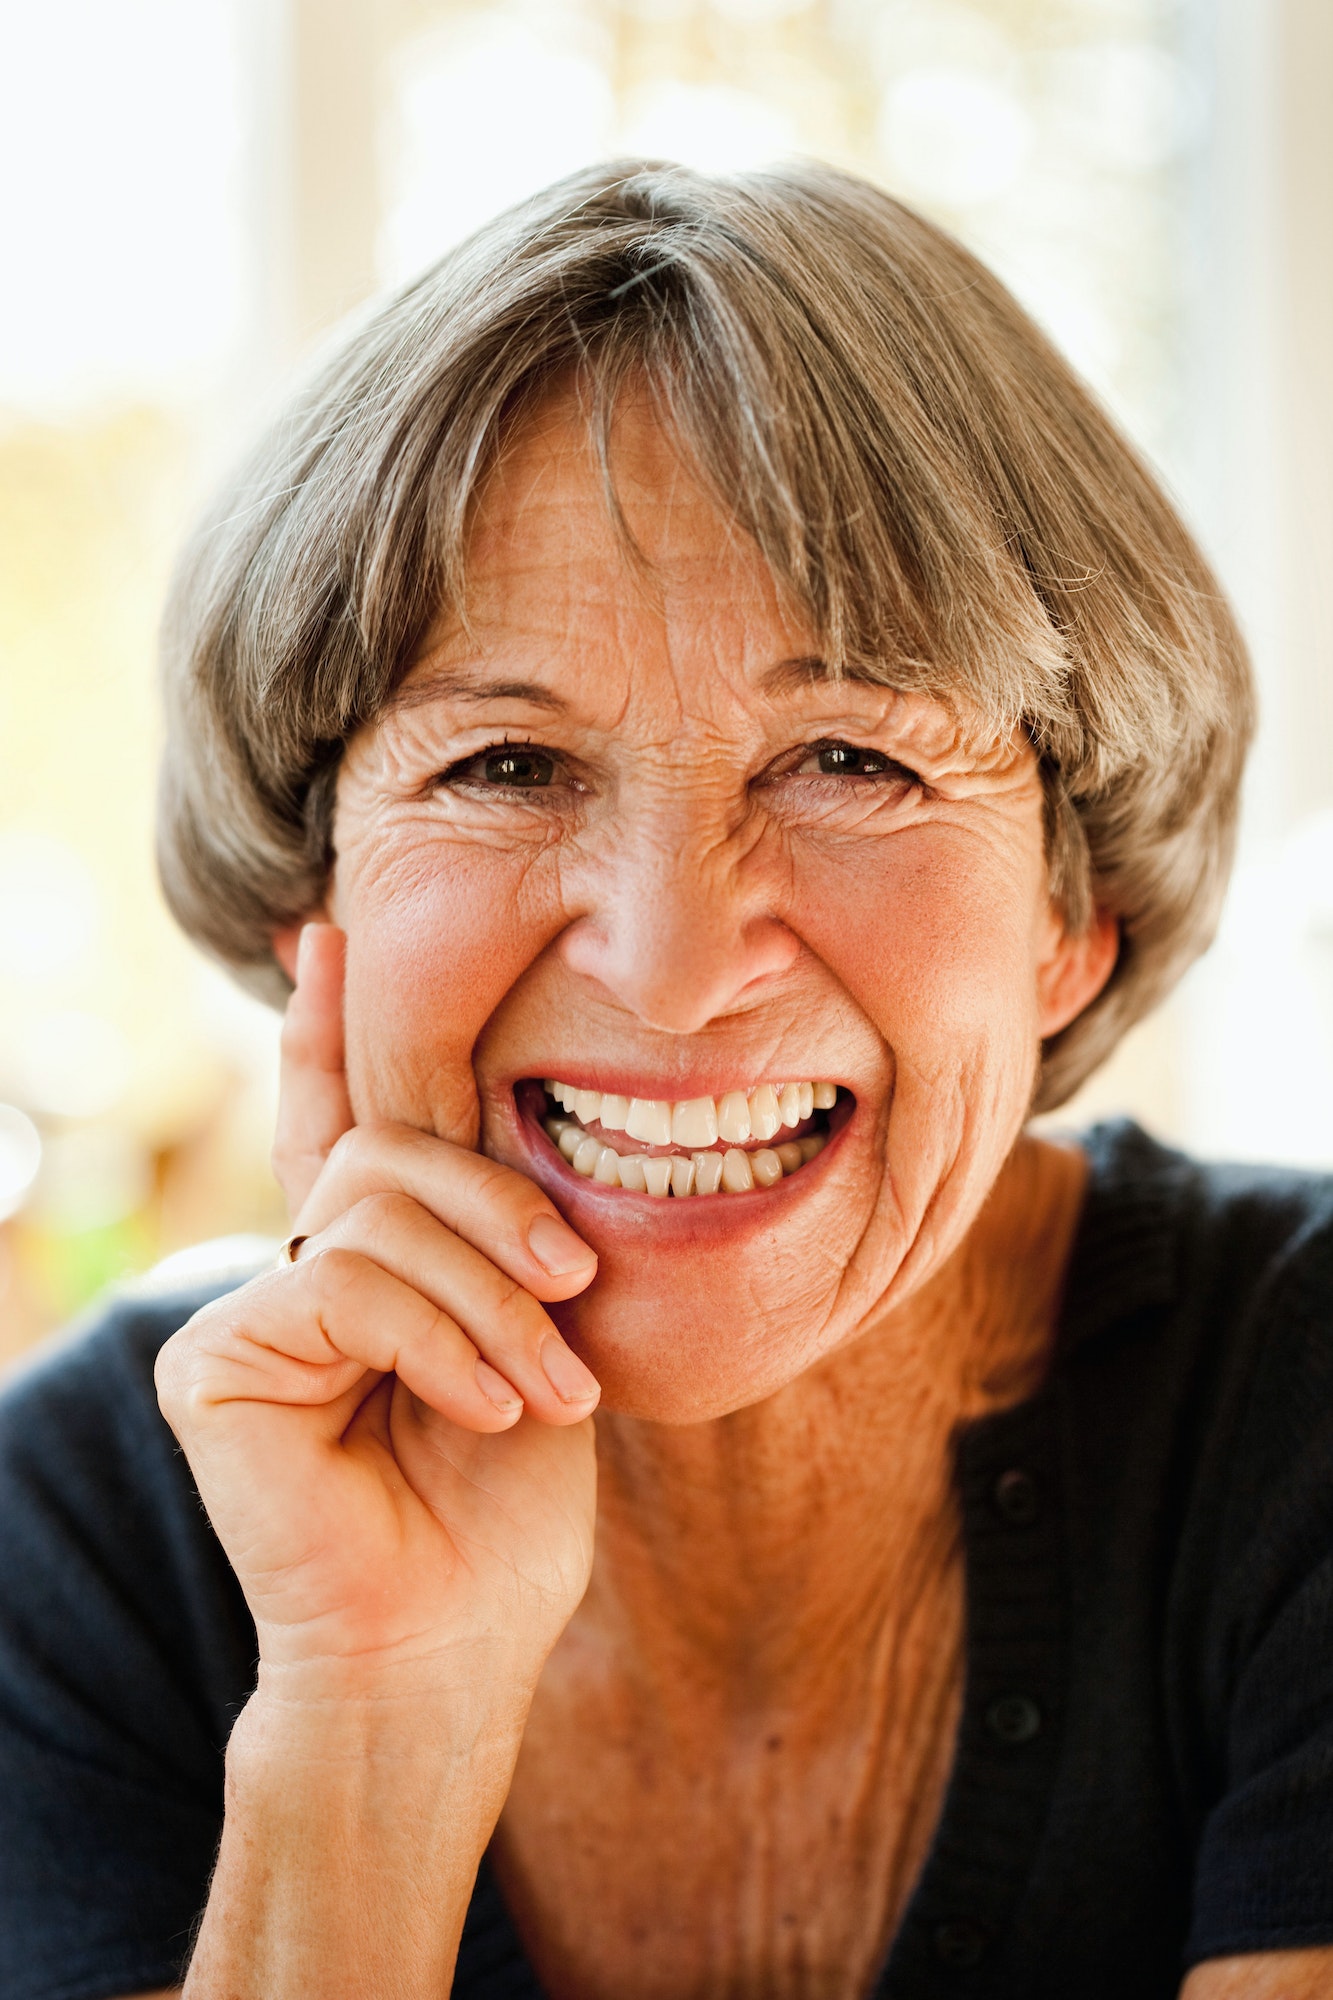 Old woman smiling at viewer